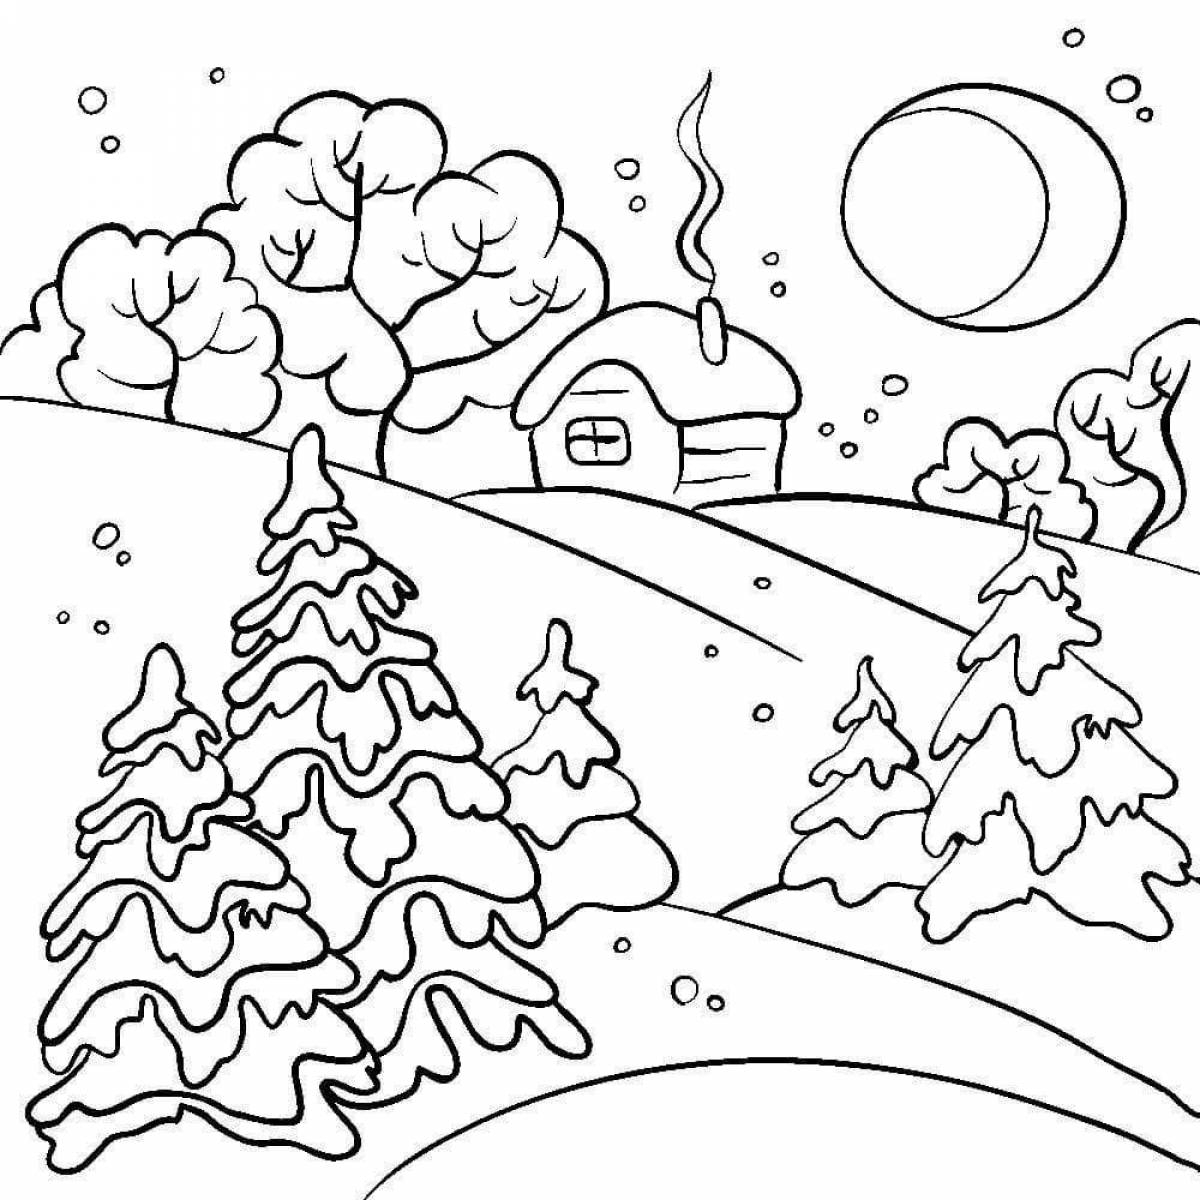 Exquisite winter in the forest coloring book